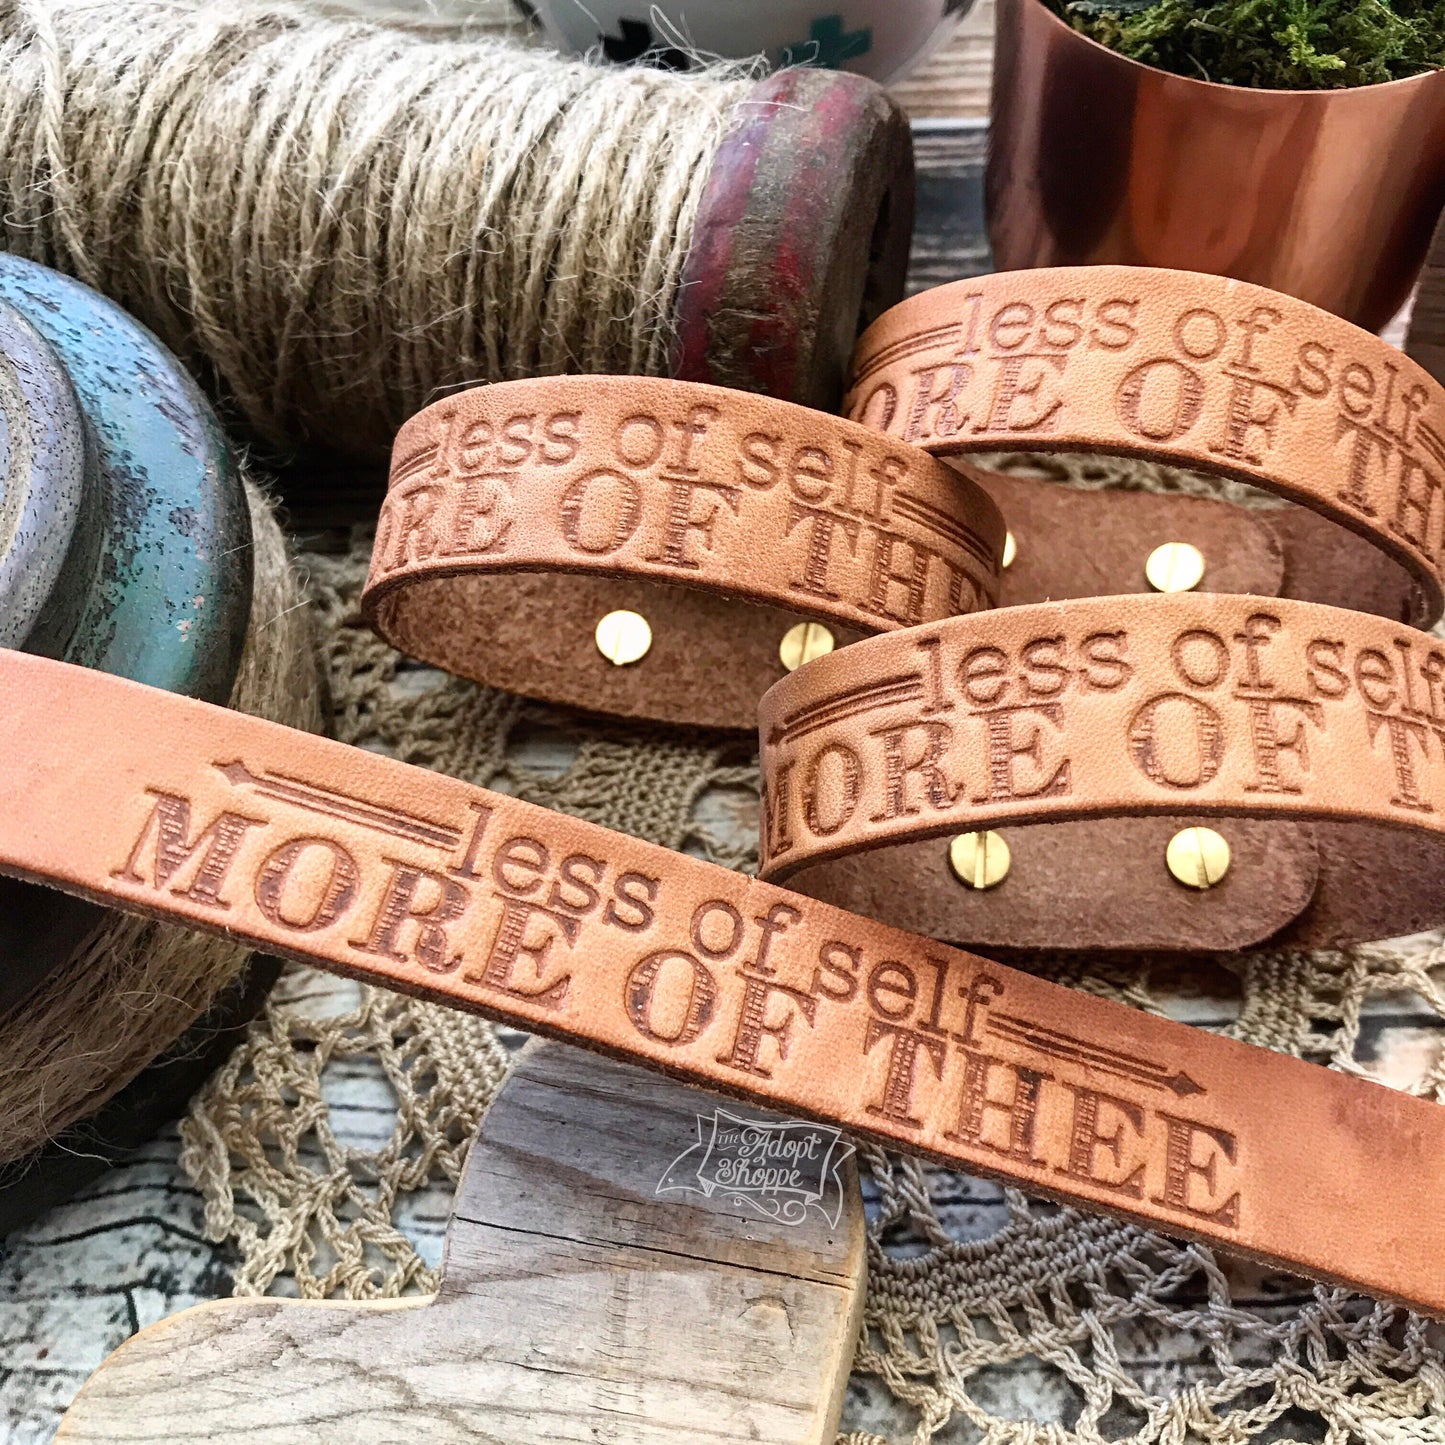 less of self - more of Thee (camel/natural) leather cuff